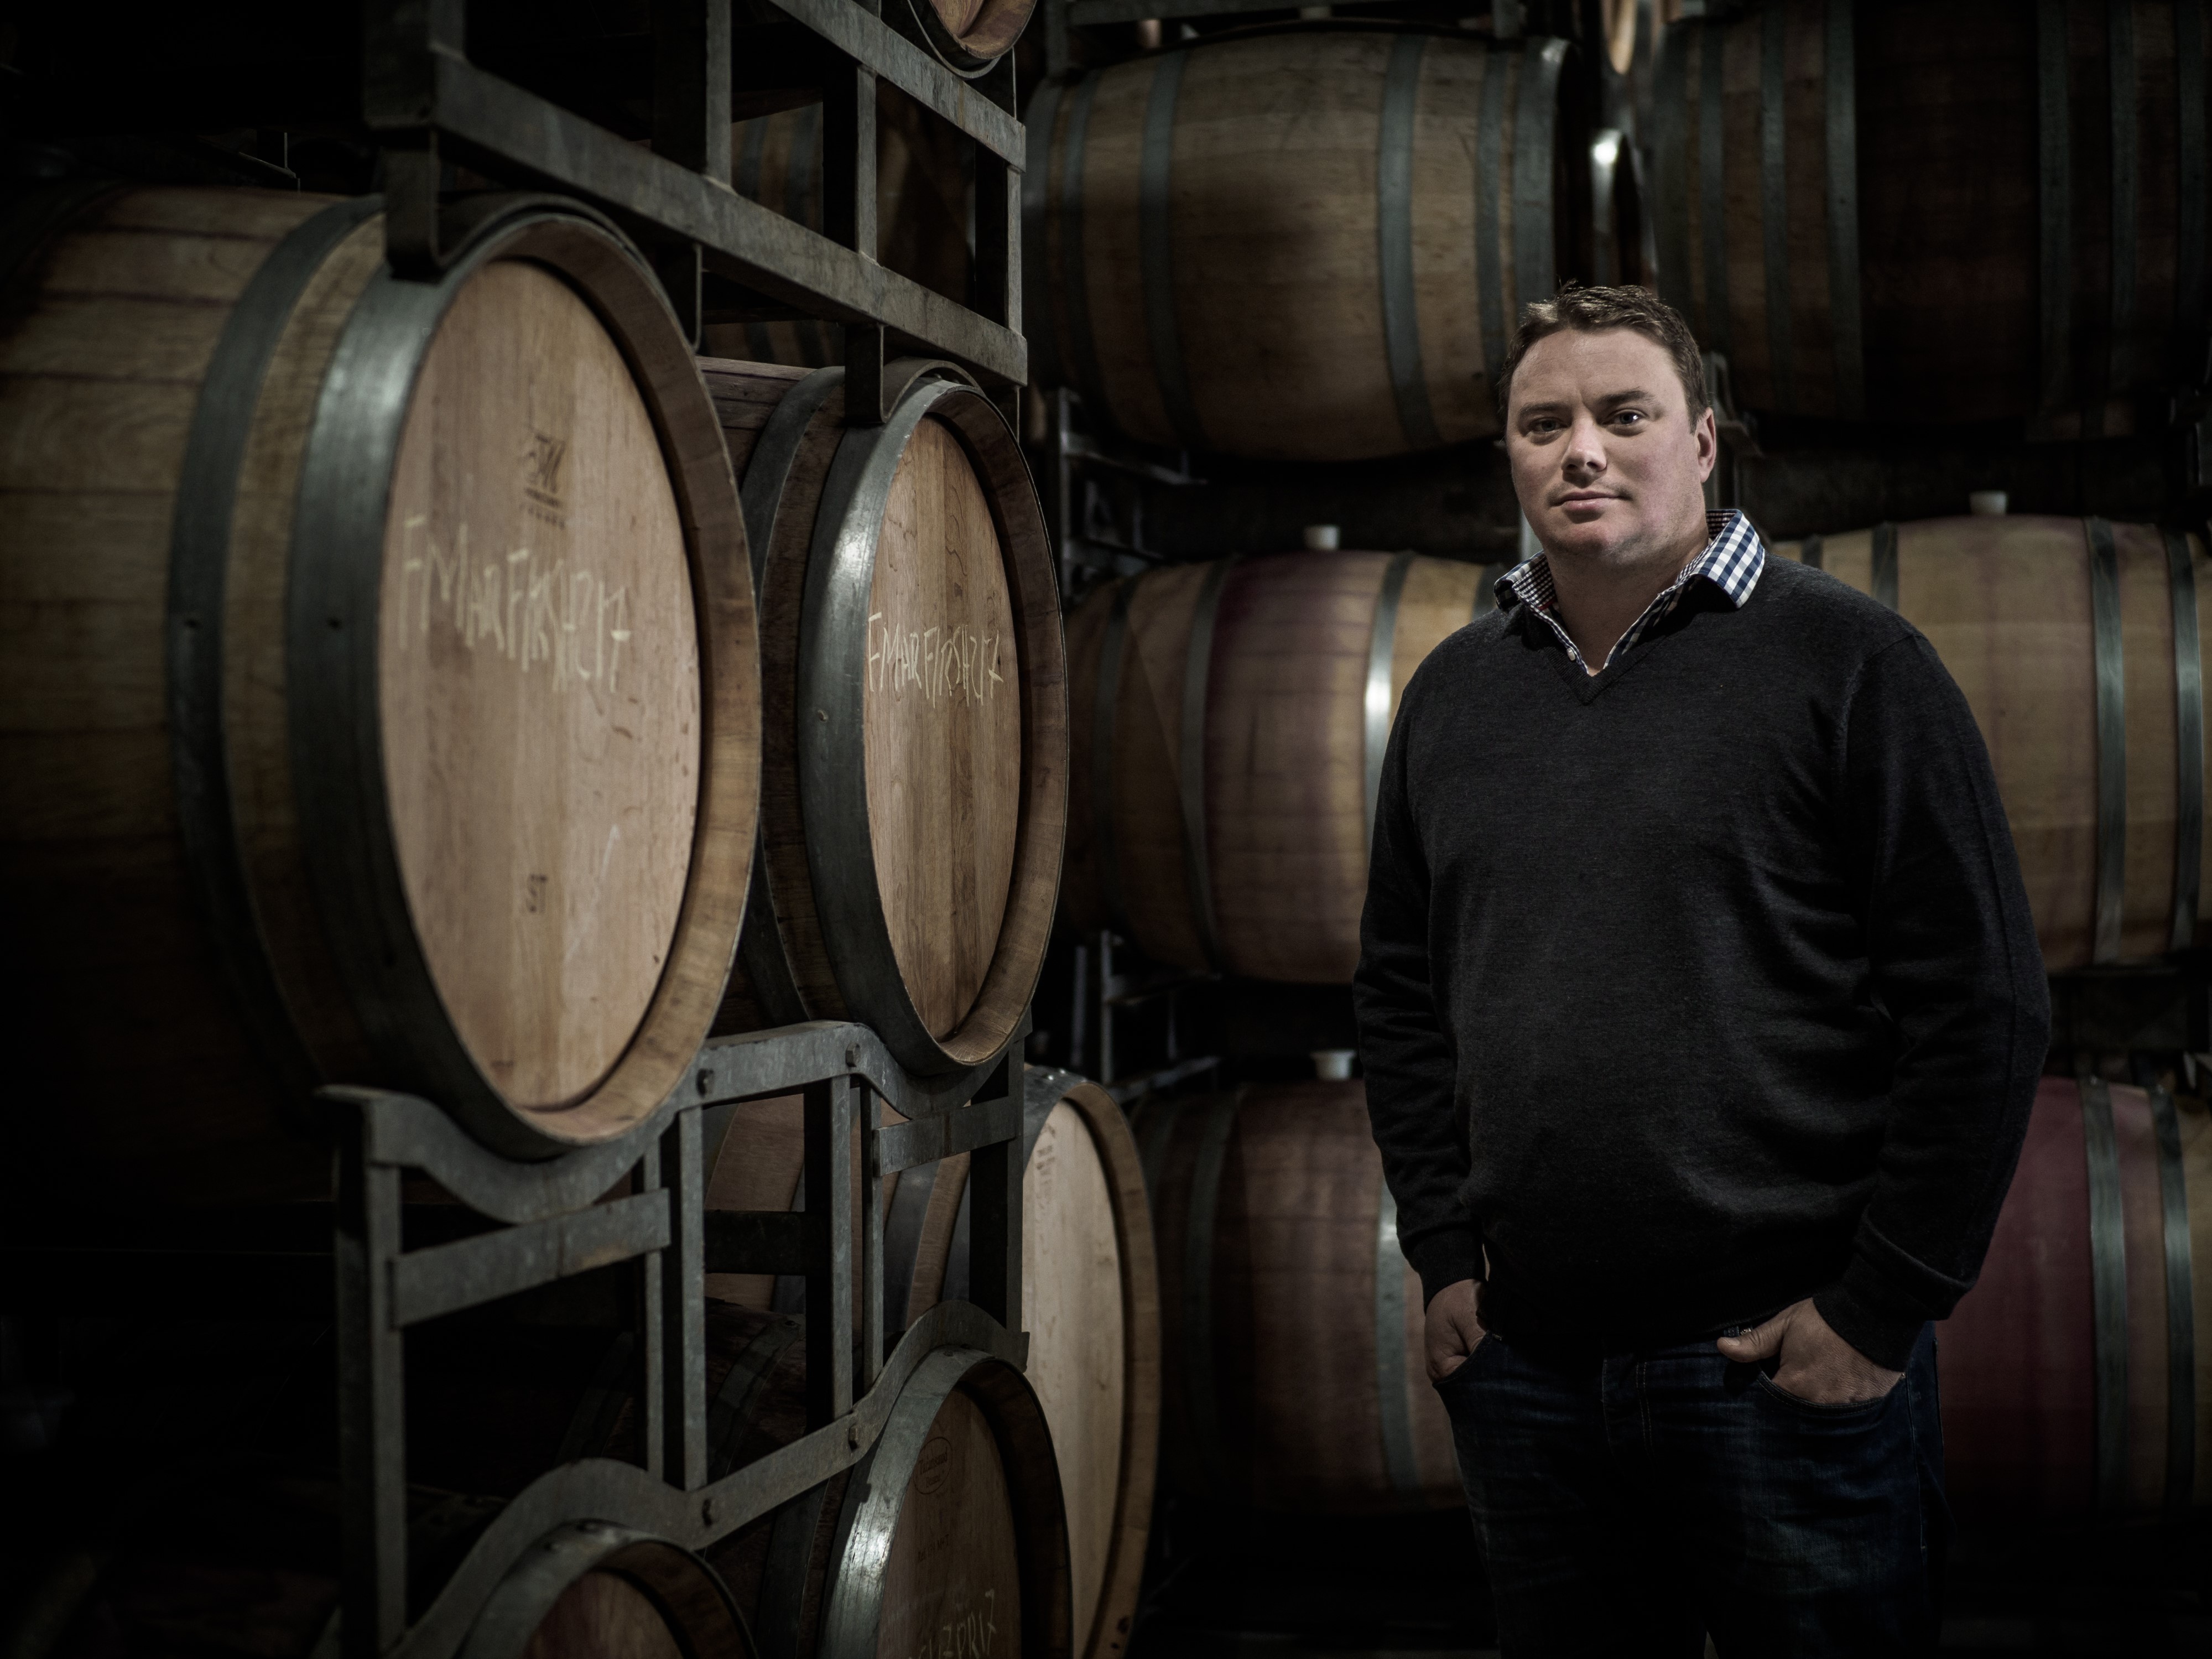 Award-winning Nick O’Leary in expansive mood with plans to double size of winery